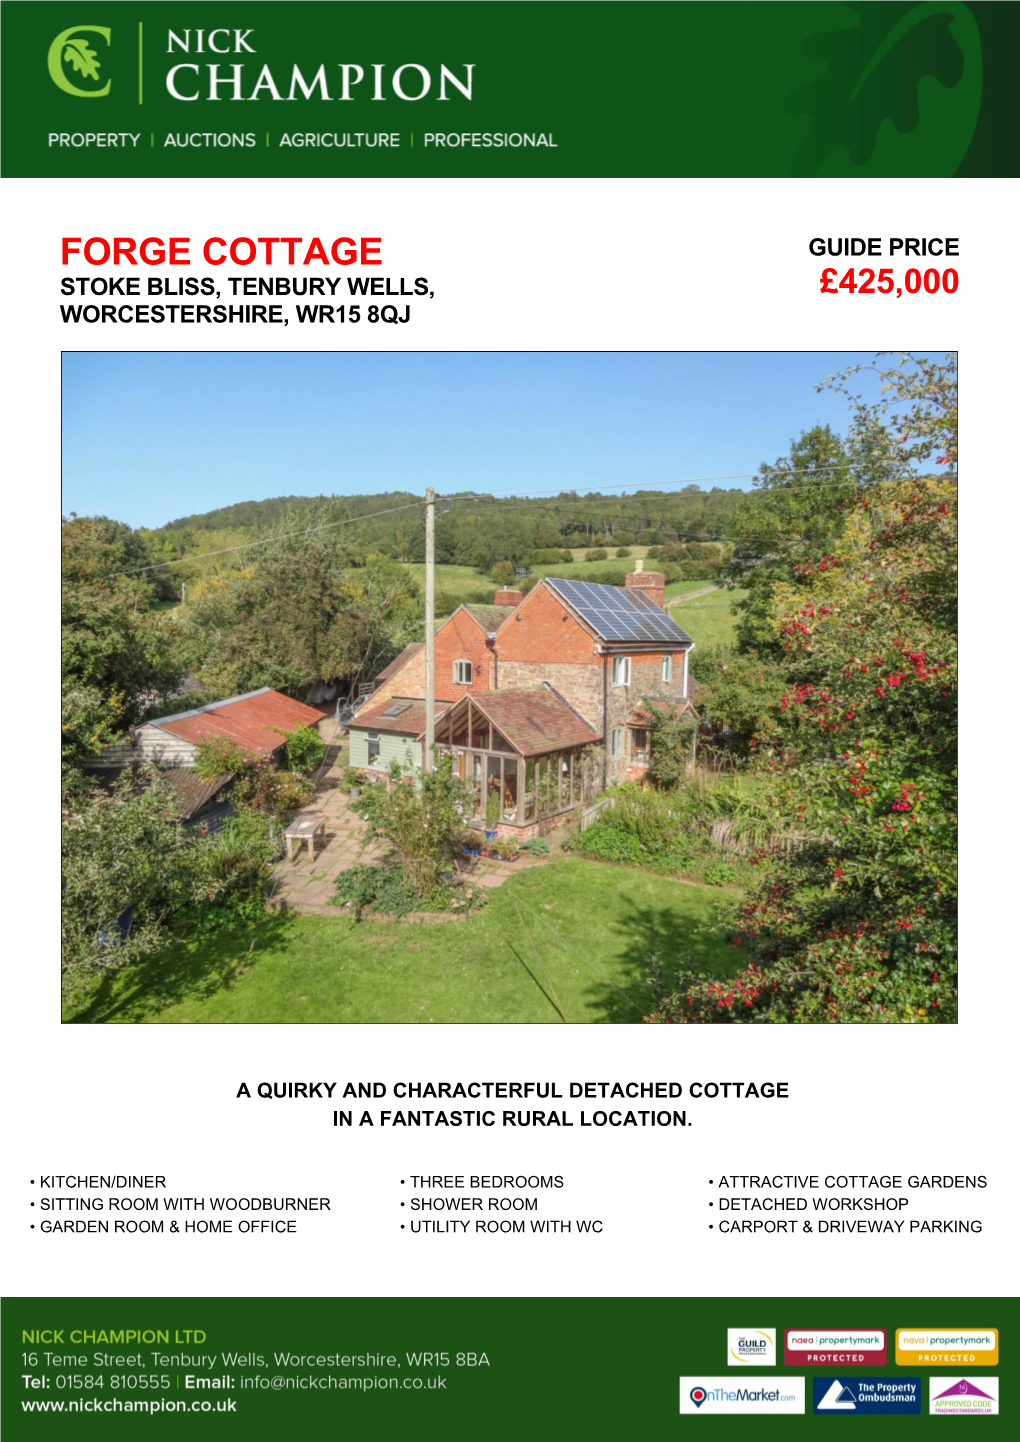 Forge Cottage Guide Price Stoke Bliss, Tenbury Wells, £425,000 Worcestershire, Wr15 8Qj